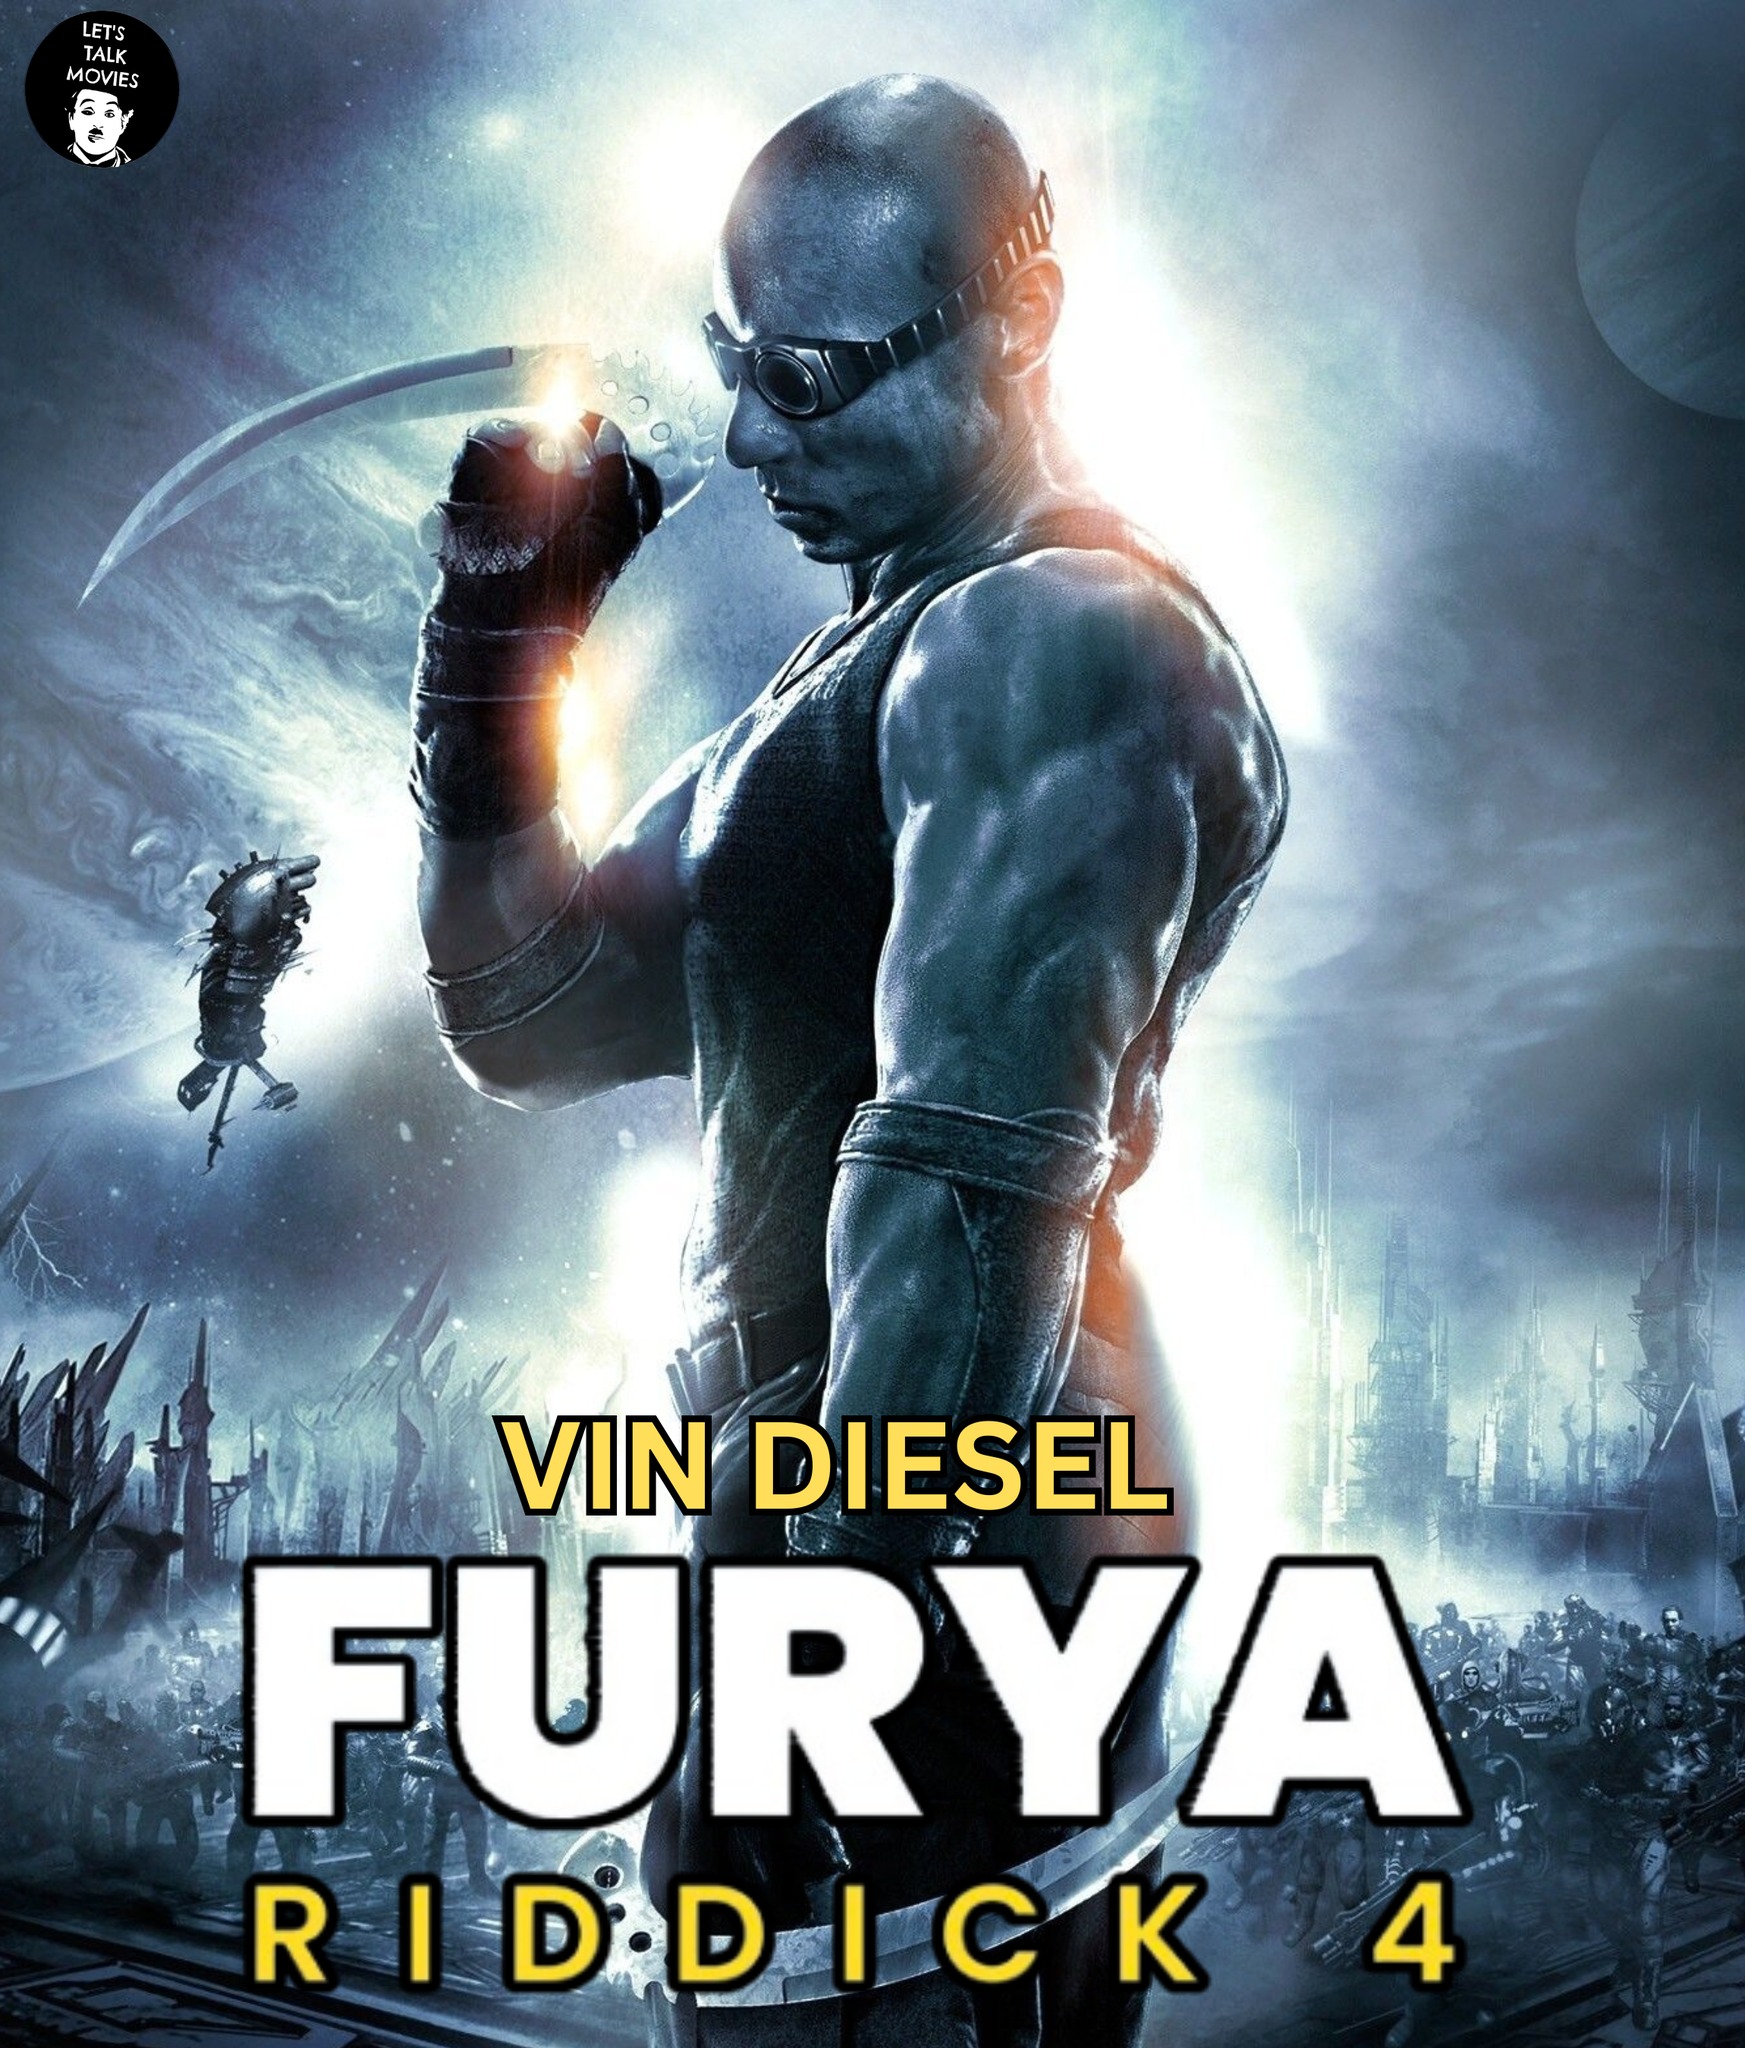 May be an image of ‎2 people and ‎text that says "‎Ers CP MGVIES TALK OVIES = ا VIN DIESEL FURYA R RID. •DI RIDDICK CK 4‎"‎‎